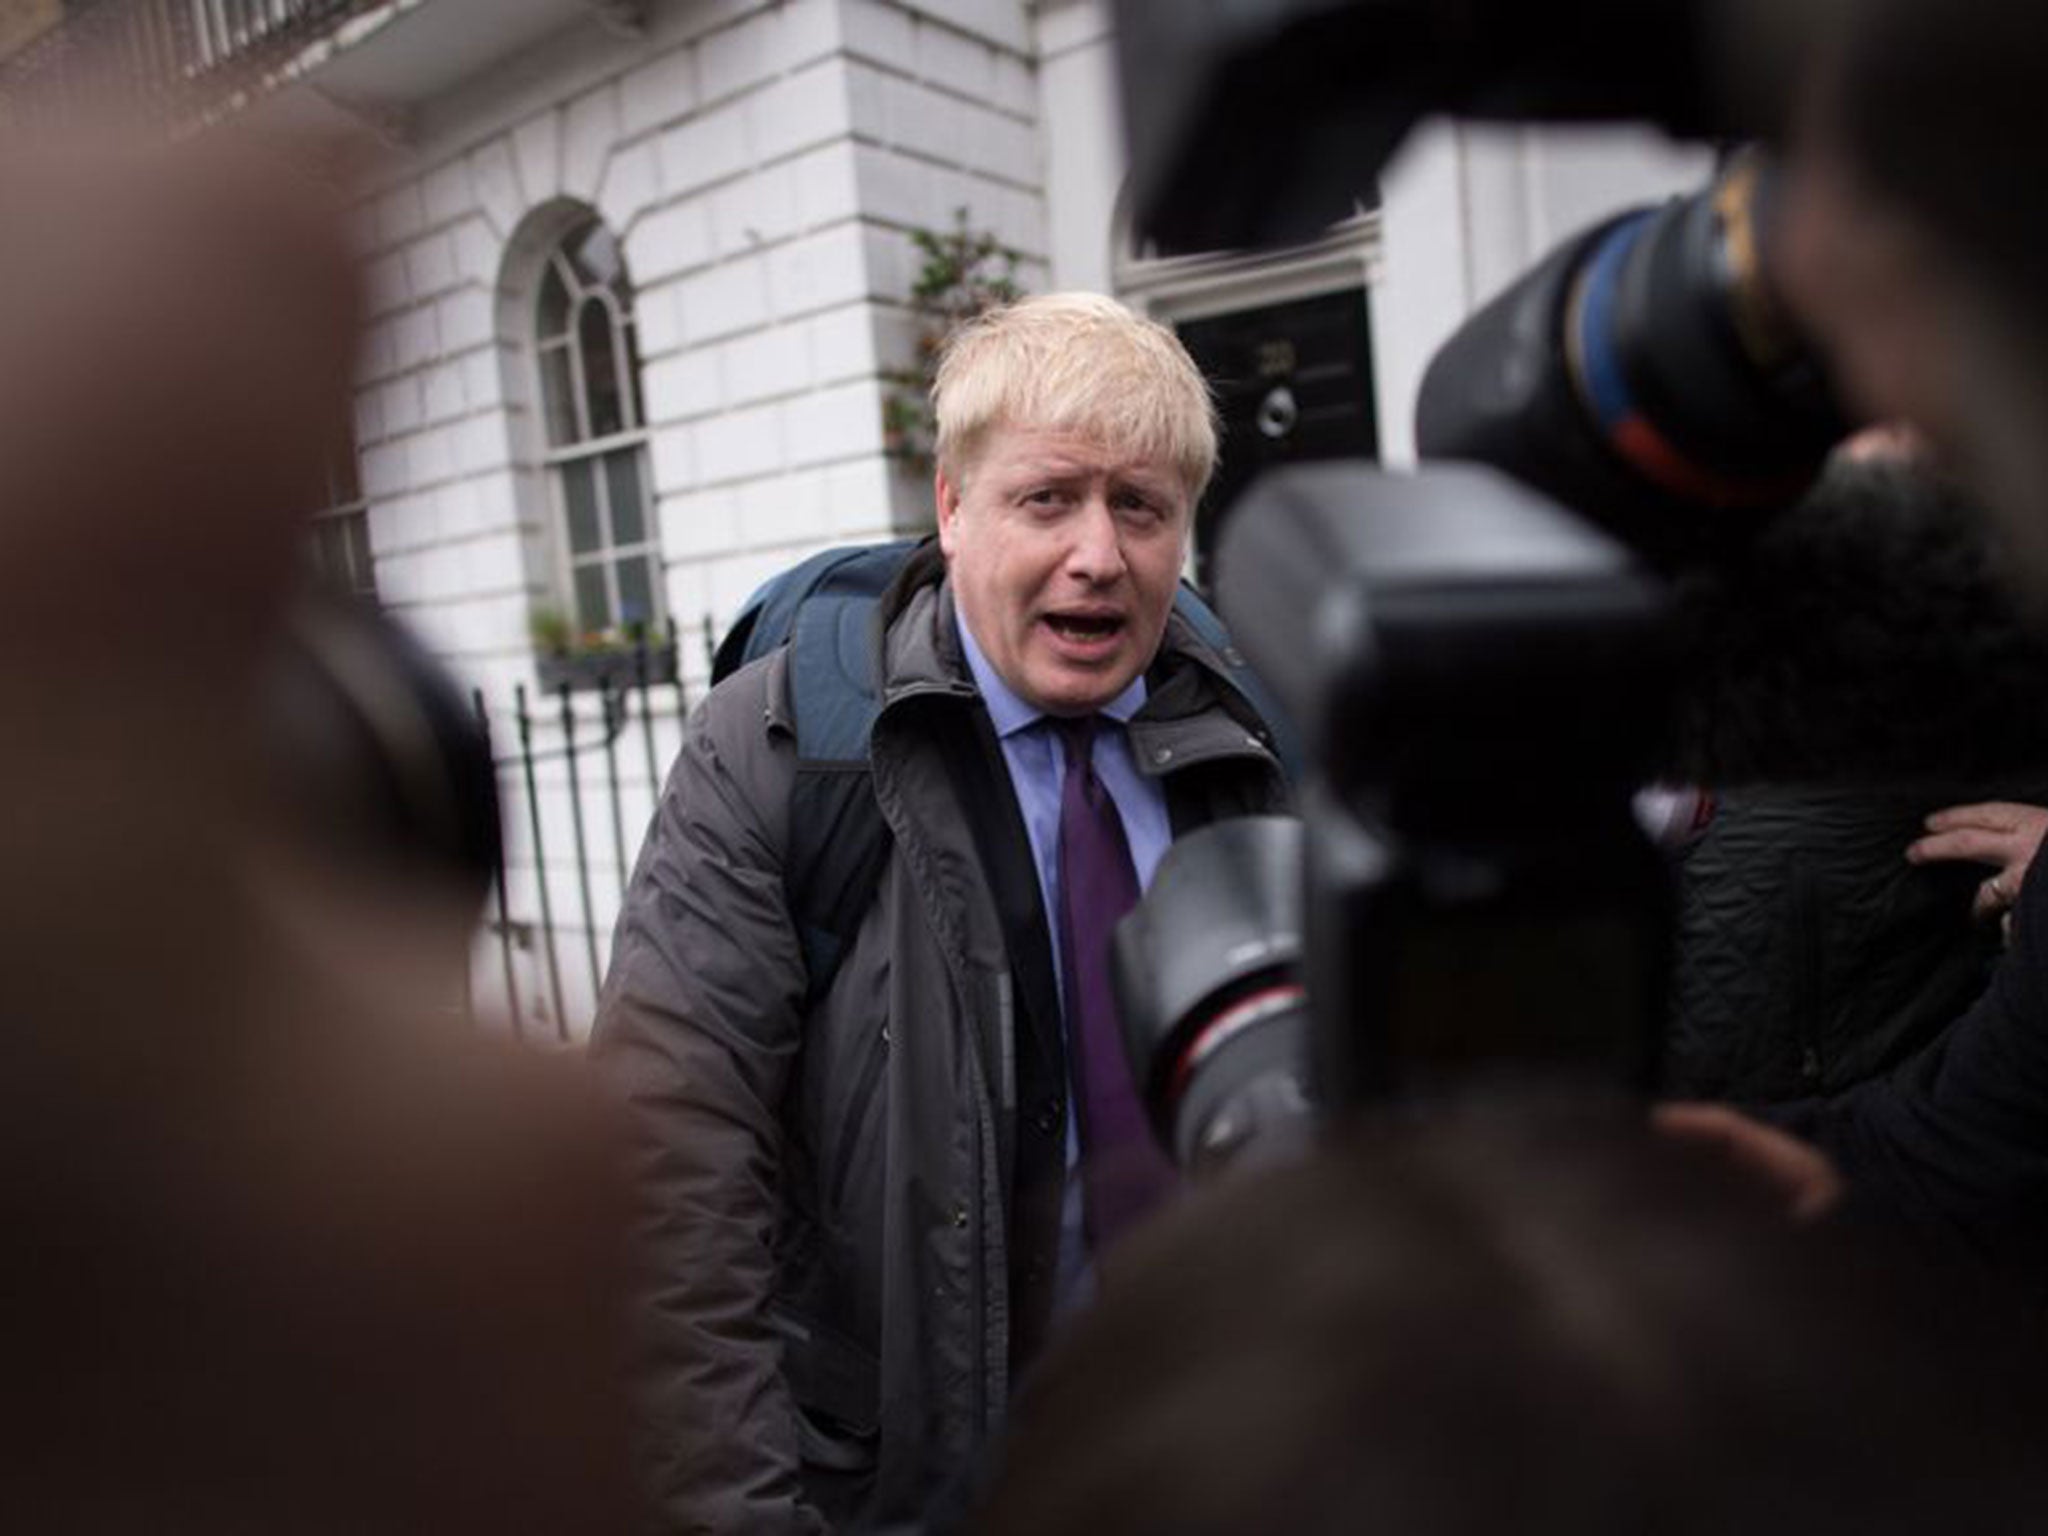 Boris Johnson leaving his home on Monday. The London Mayor heckled the Prime Minister in the Commons over Brexit